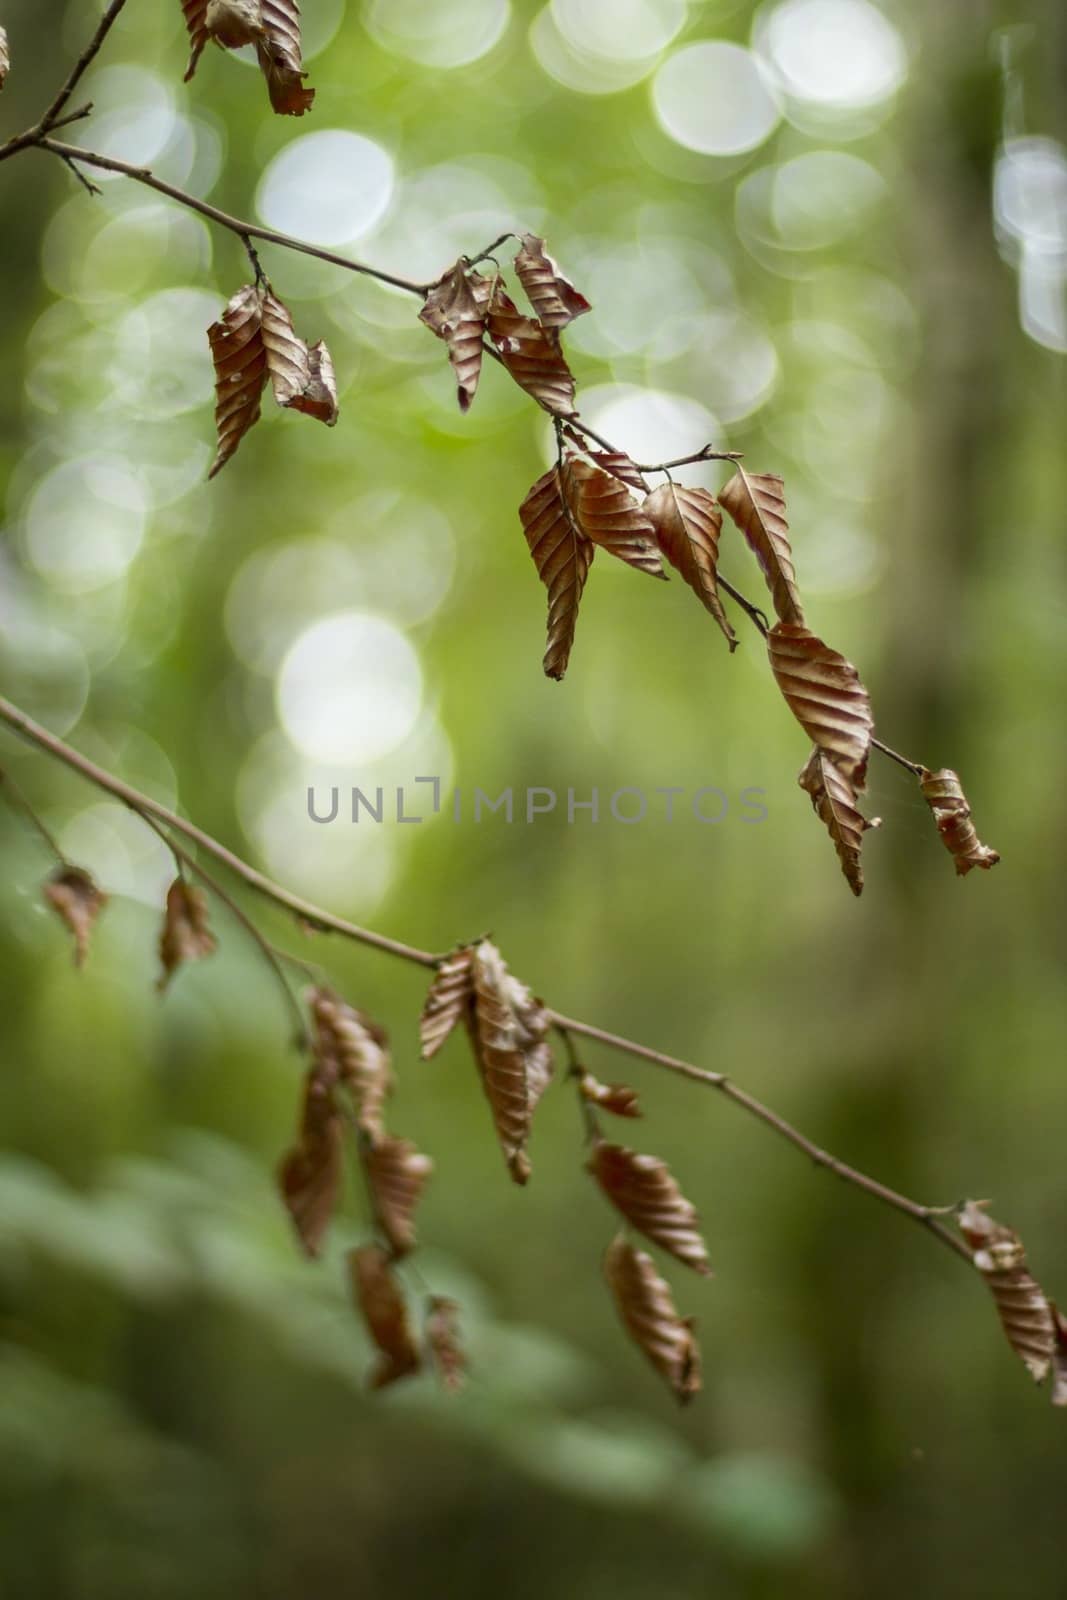 Dead leaves on branches with green forest out of focus in the background